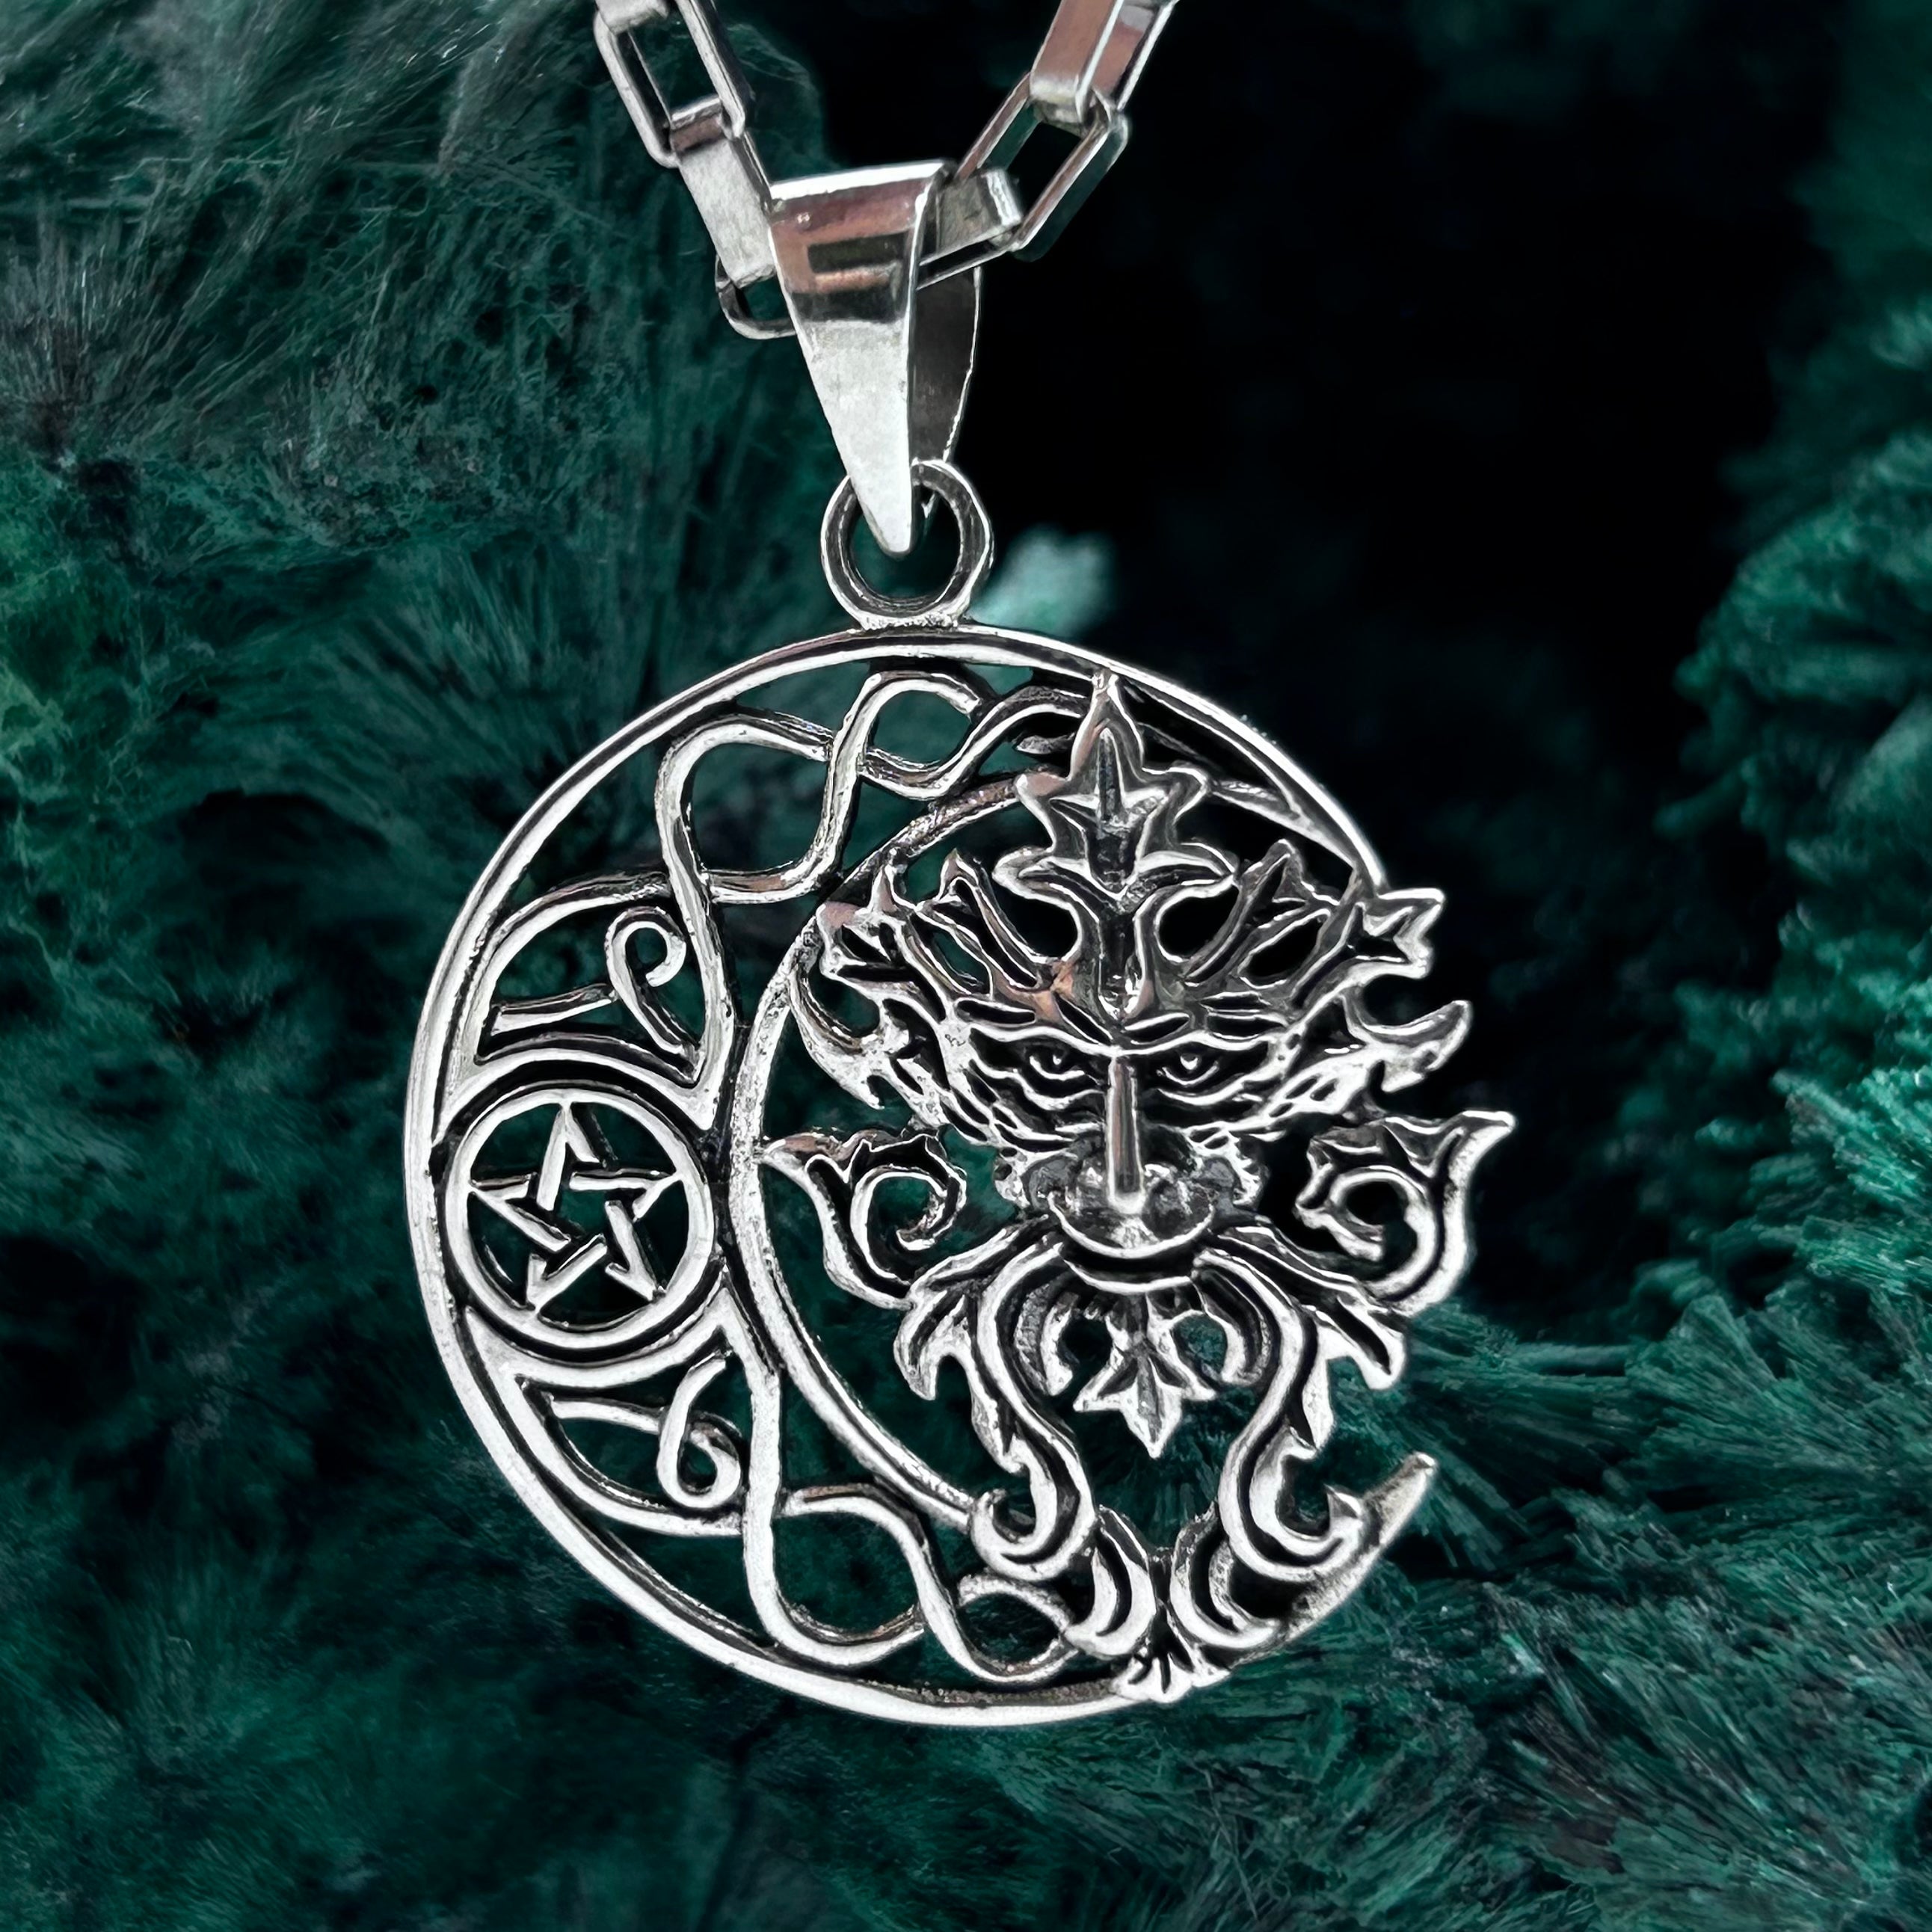 Green Man Cresent Moon Sterling Silver Pendant